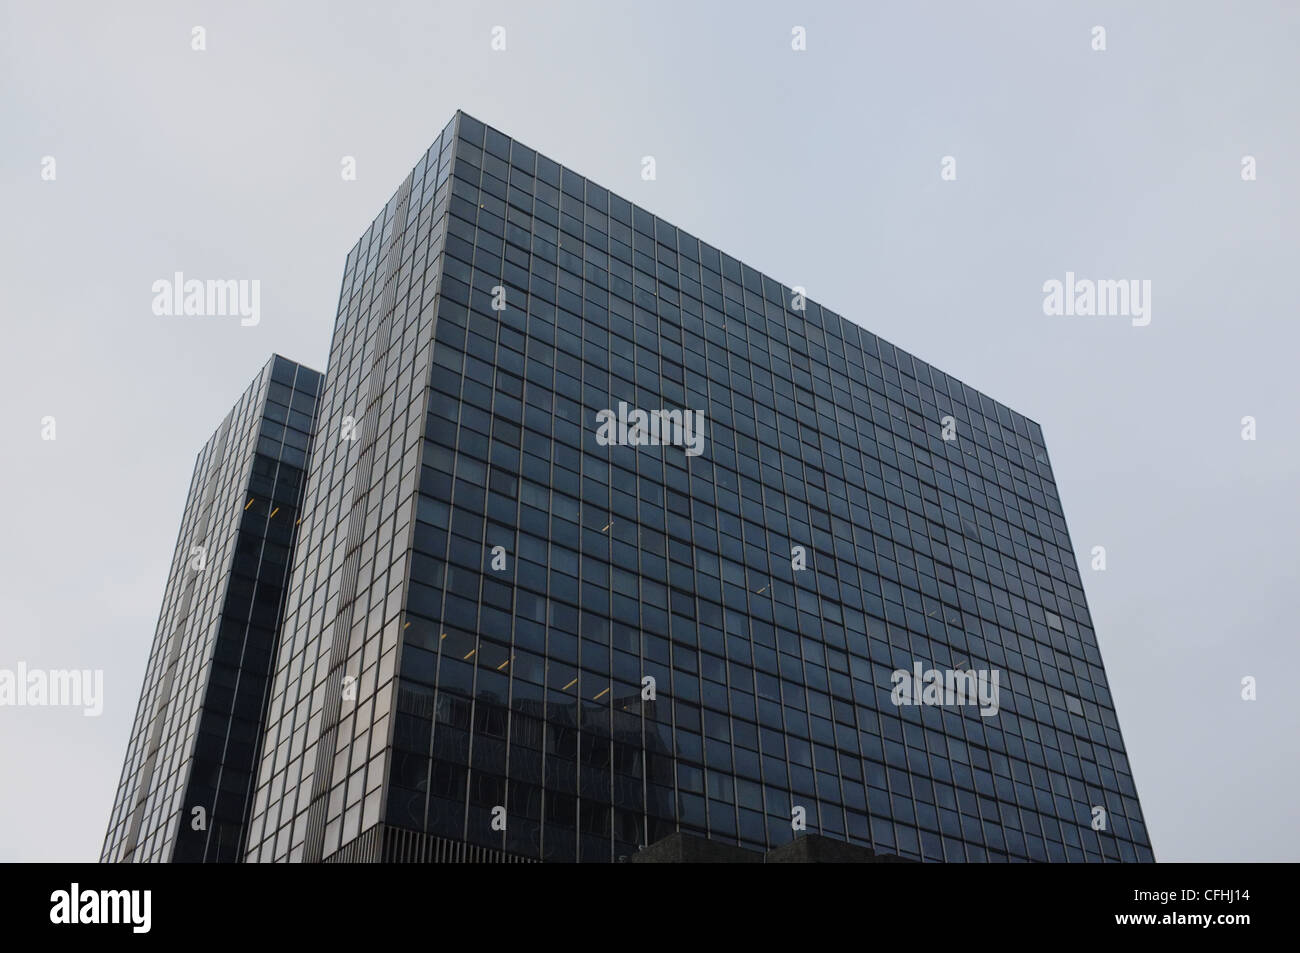 High rise office buildings a modern example of architecture in the city centre of Brussels, Belgium. Stock Photo